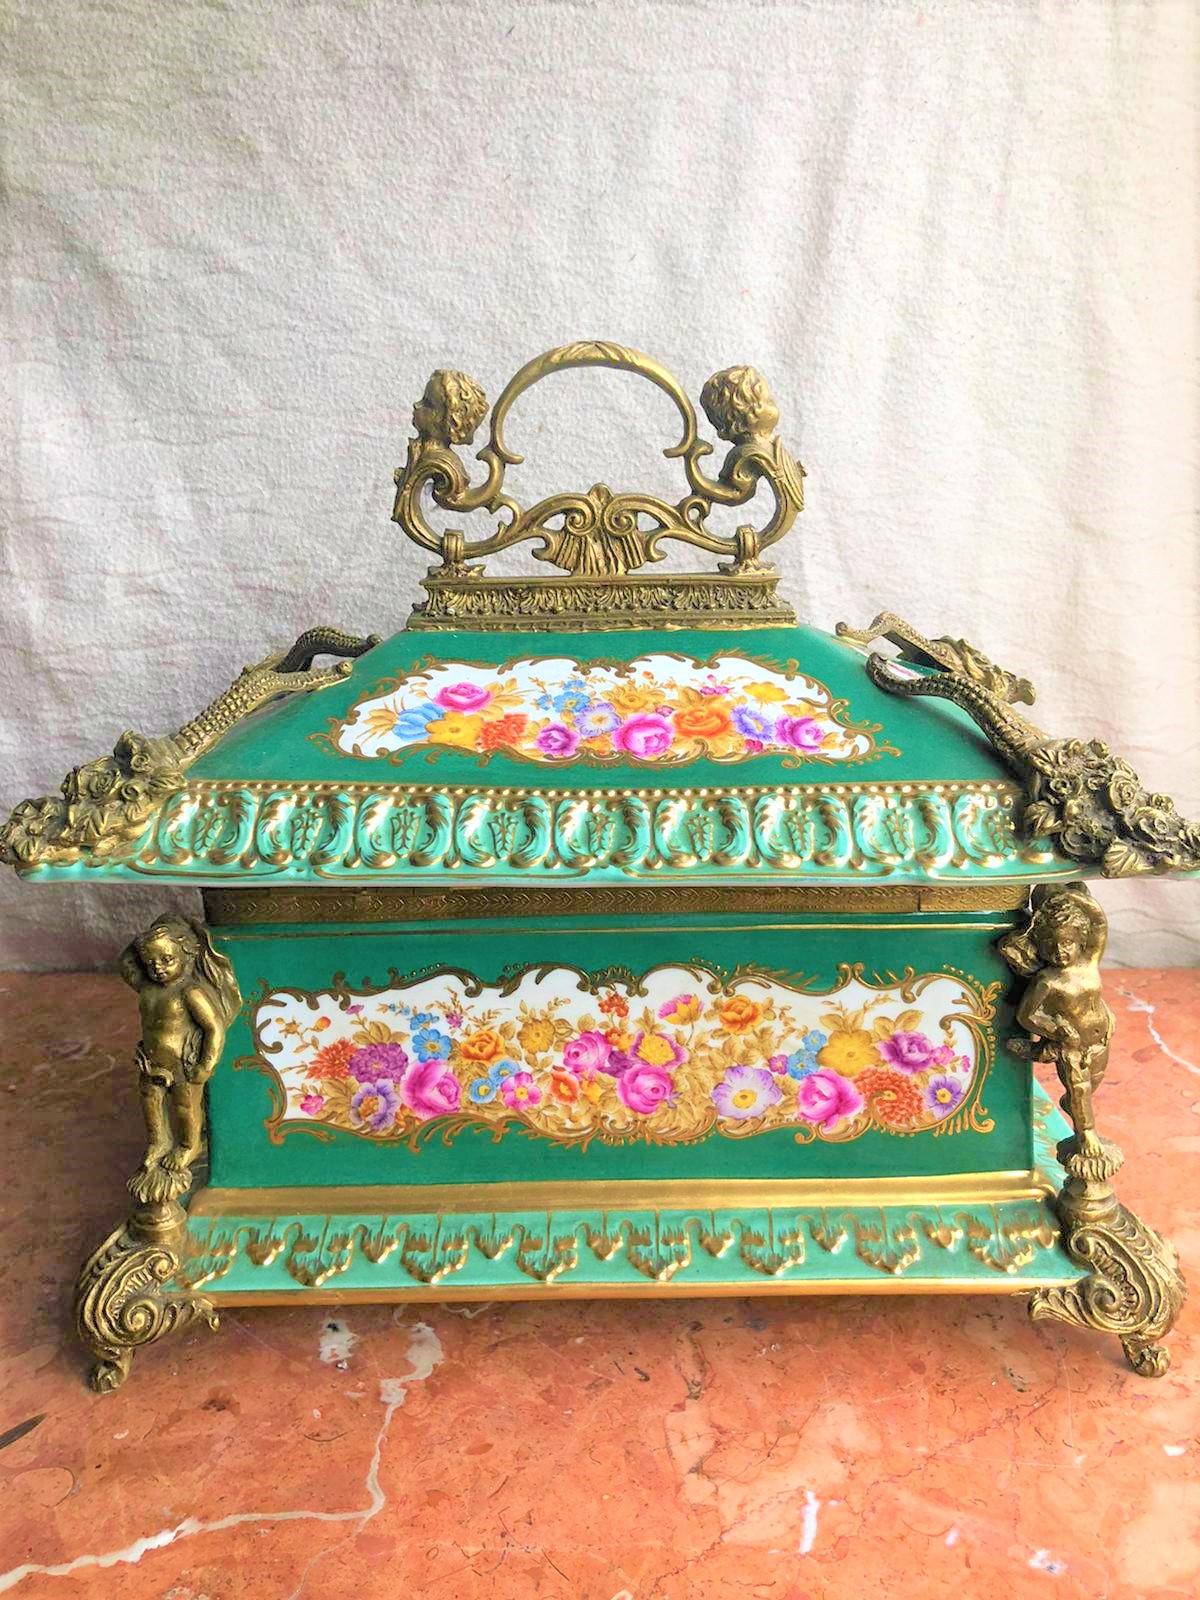 An large emerald green colored Sevres style gilded bronze jewelry box with scenes of nature and painted flowers. Decorated with bronze and painted with bouquet of flowers and cherubs on each corner laying on imperial stands. Accompanied with